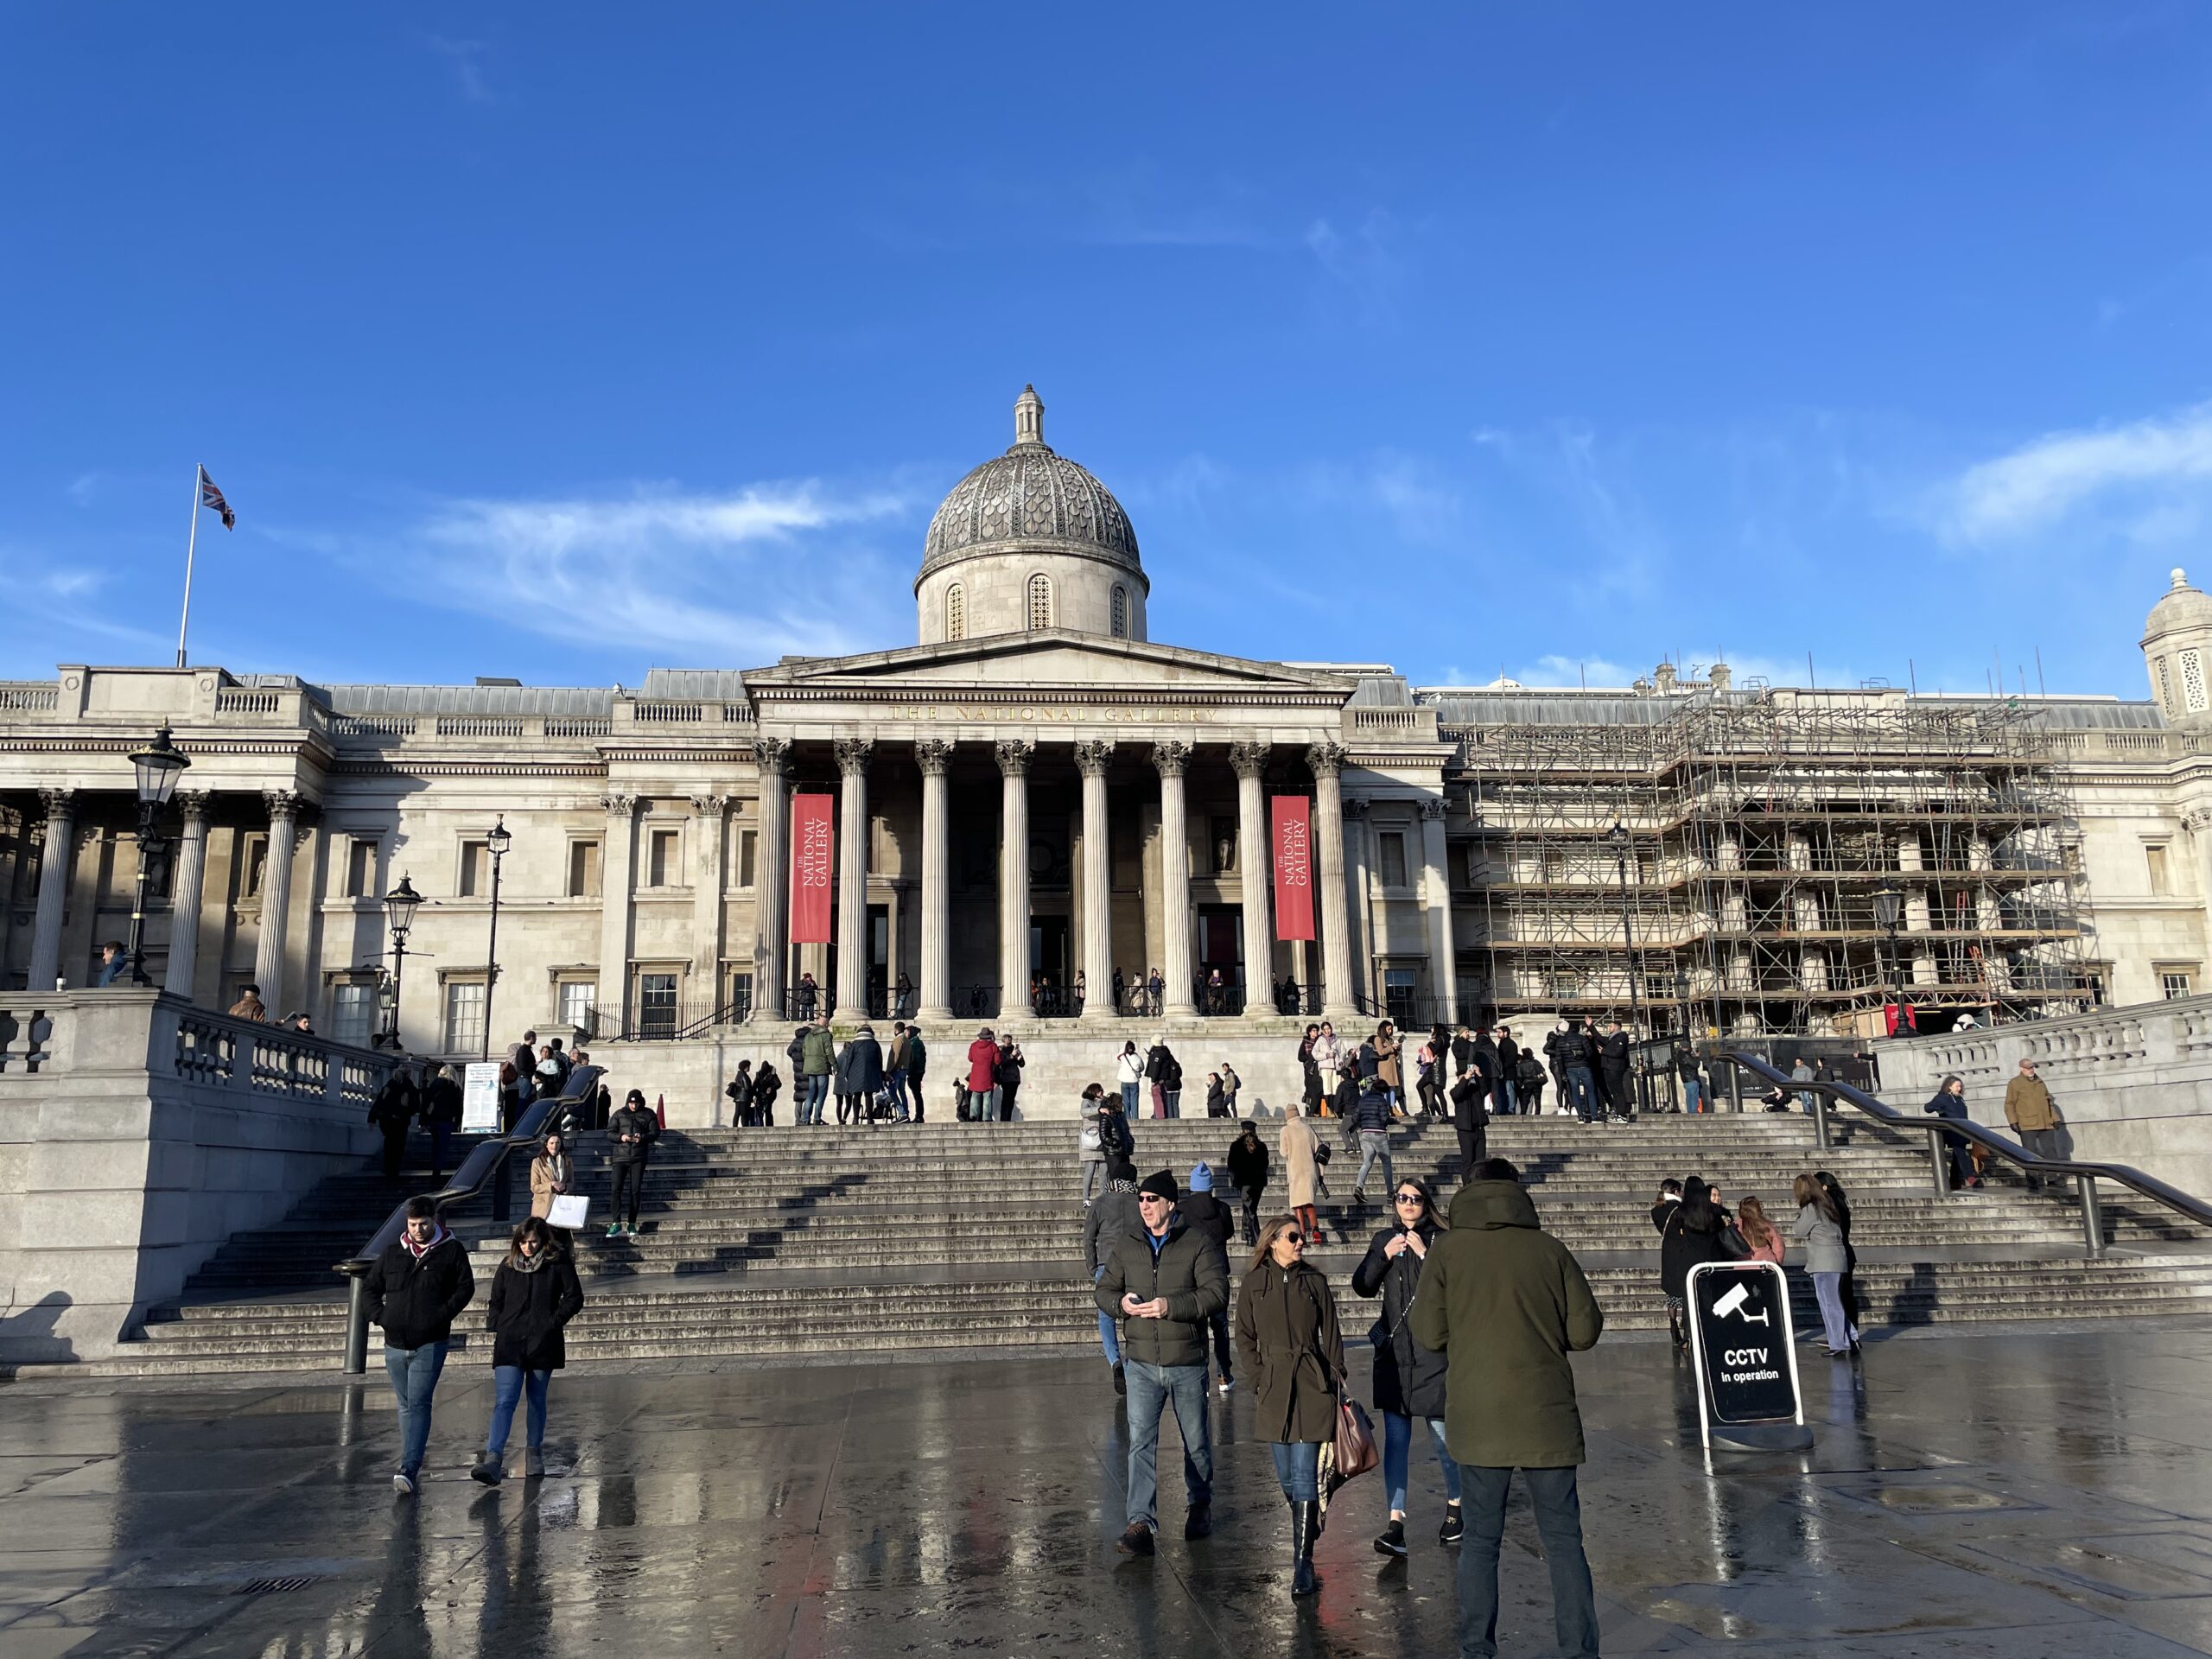 Best Art Museums to Check Out in London